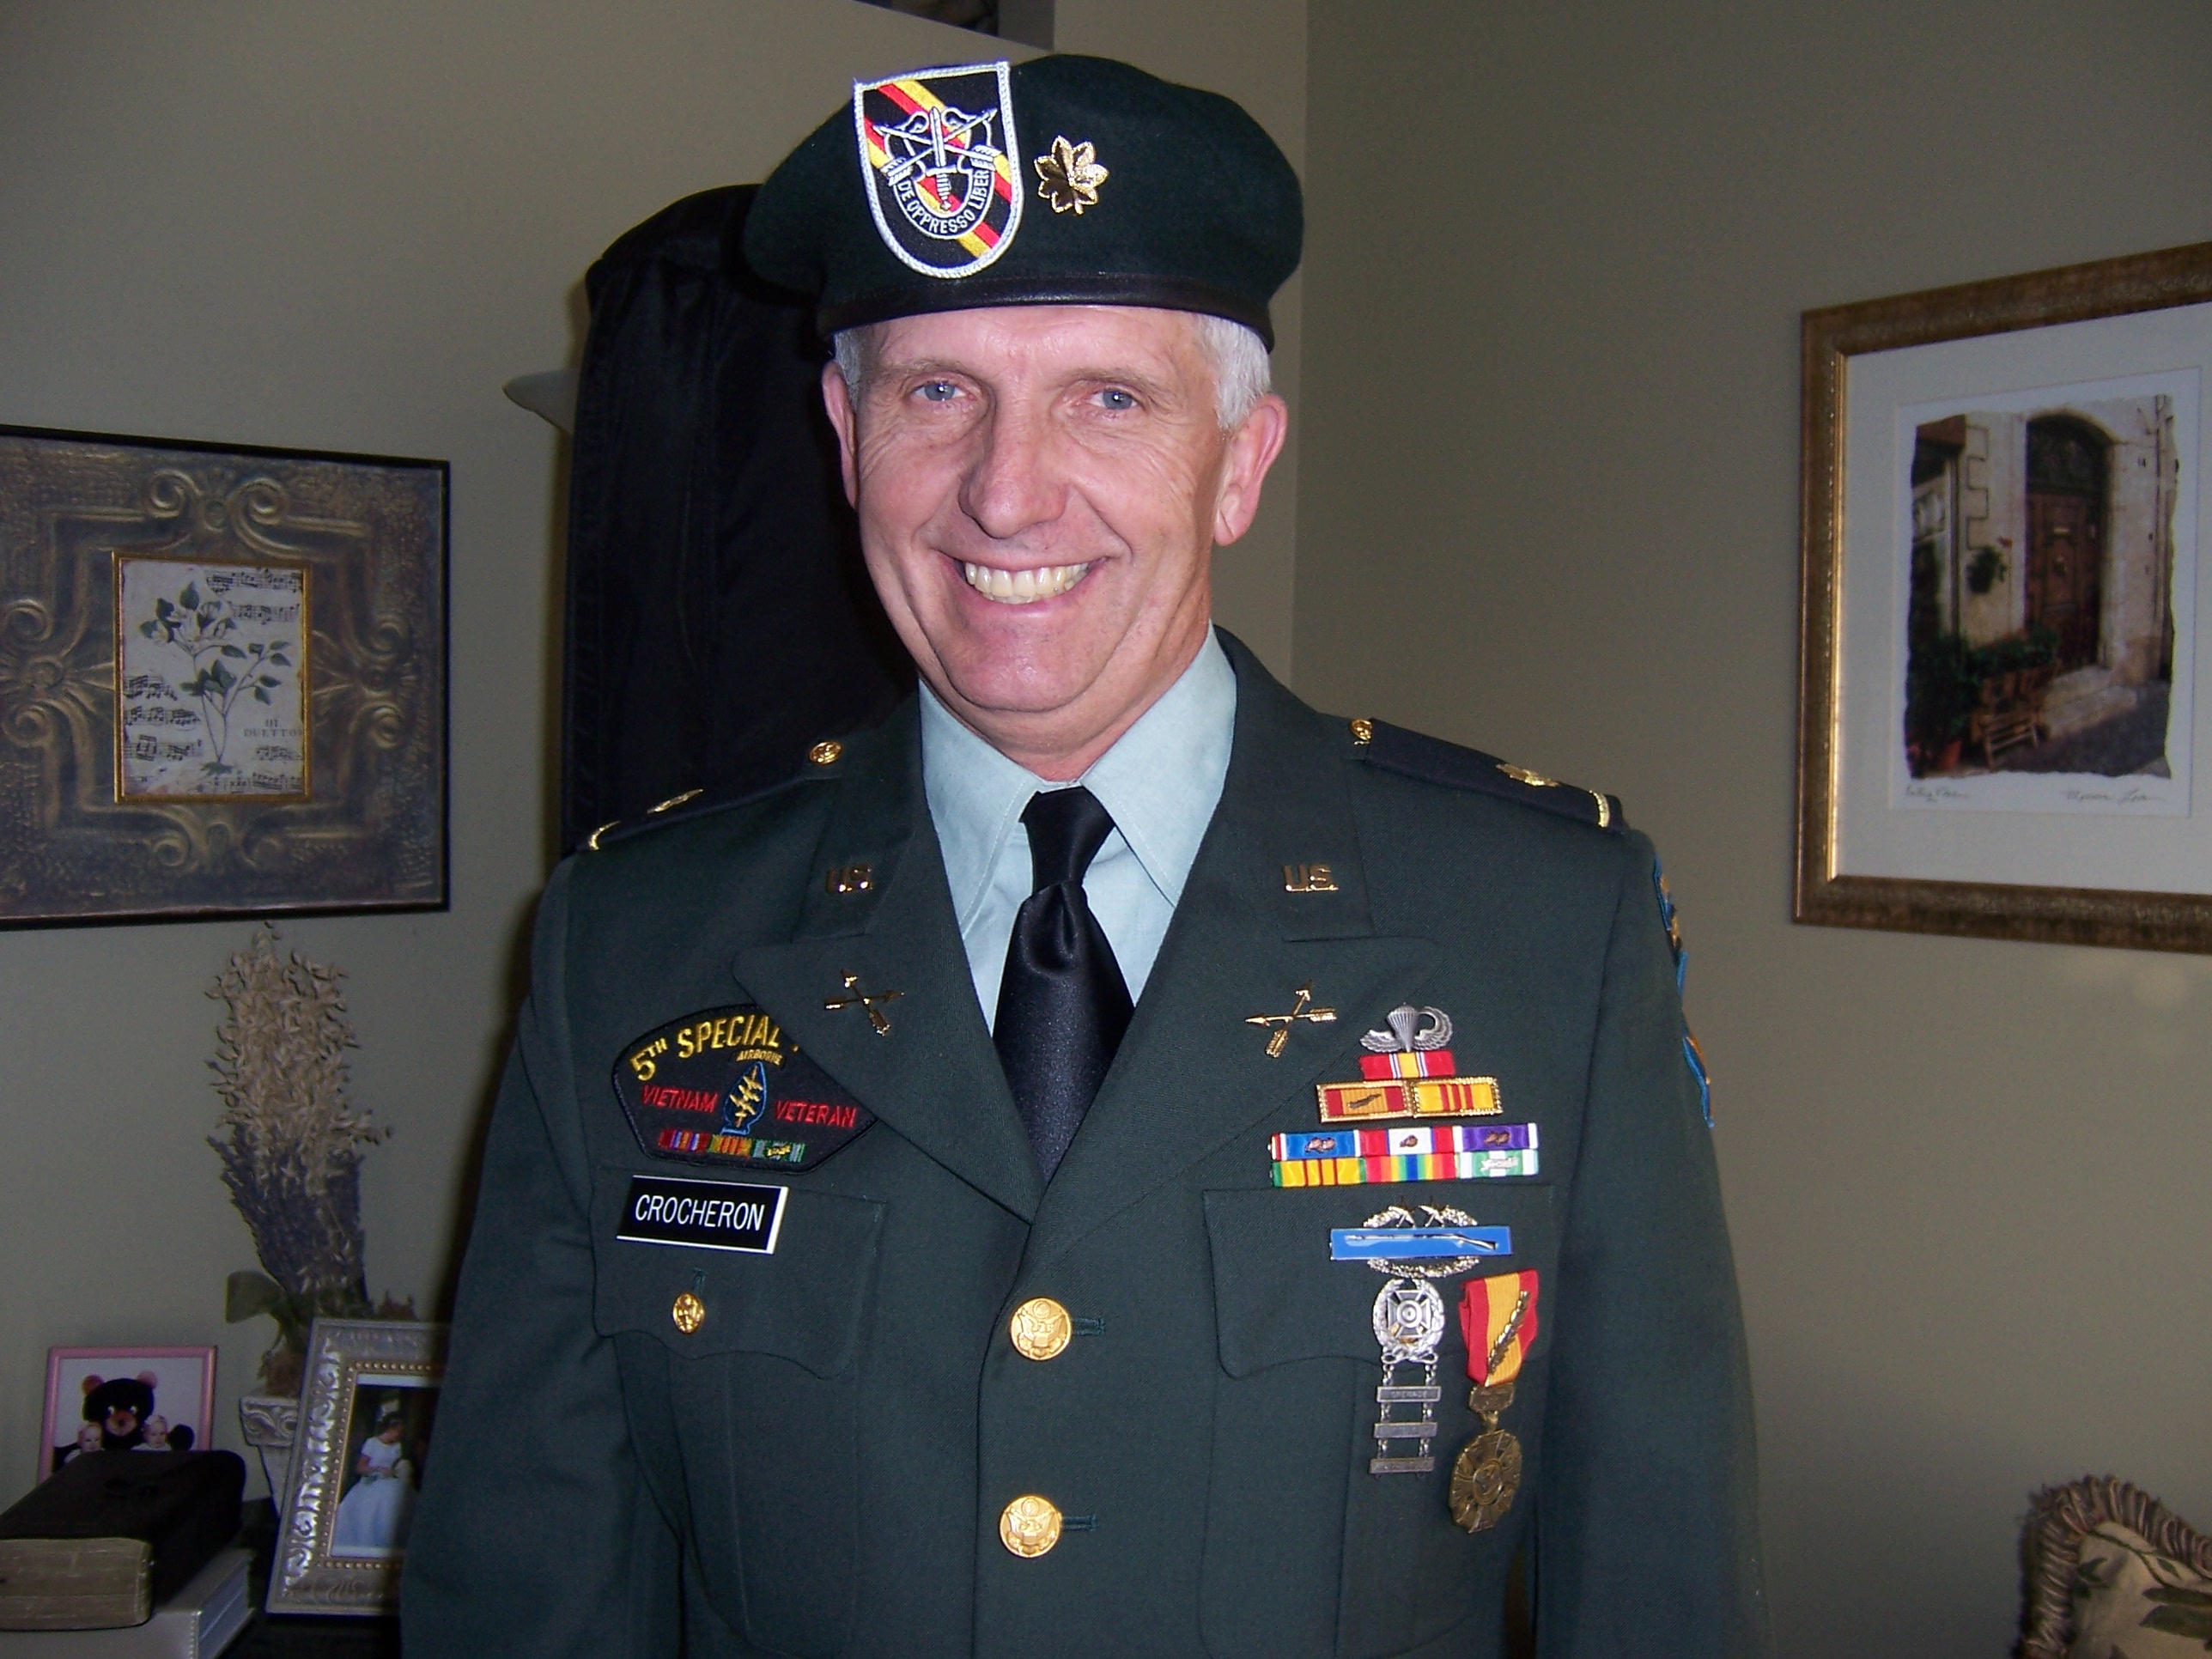 1. The flash on his Green Beret isn't the authorized flash, it's a store bought replica. 2. The Green Beret crest, pinned upon the flash upon his beret doesn't belong there for an officer. His Major's oak leaf's are supposed to be mounted on the flash. 3.3. His shoulder epaulets are incorrect for a Green Beret officer. 4. His ribbons are not placed correctly they should be aligned to the left, not in a pyramid configuration. 5. His C.I.B. Combat Infantrymen's Badge - the rifle with the wreath should be placed above his jump wings.And these are only a few of the problems with this man's uniform..